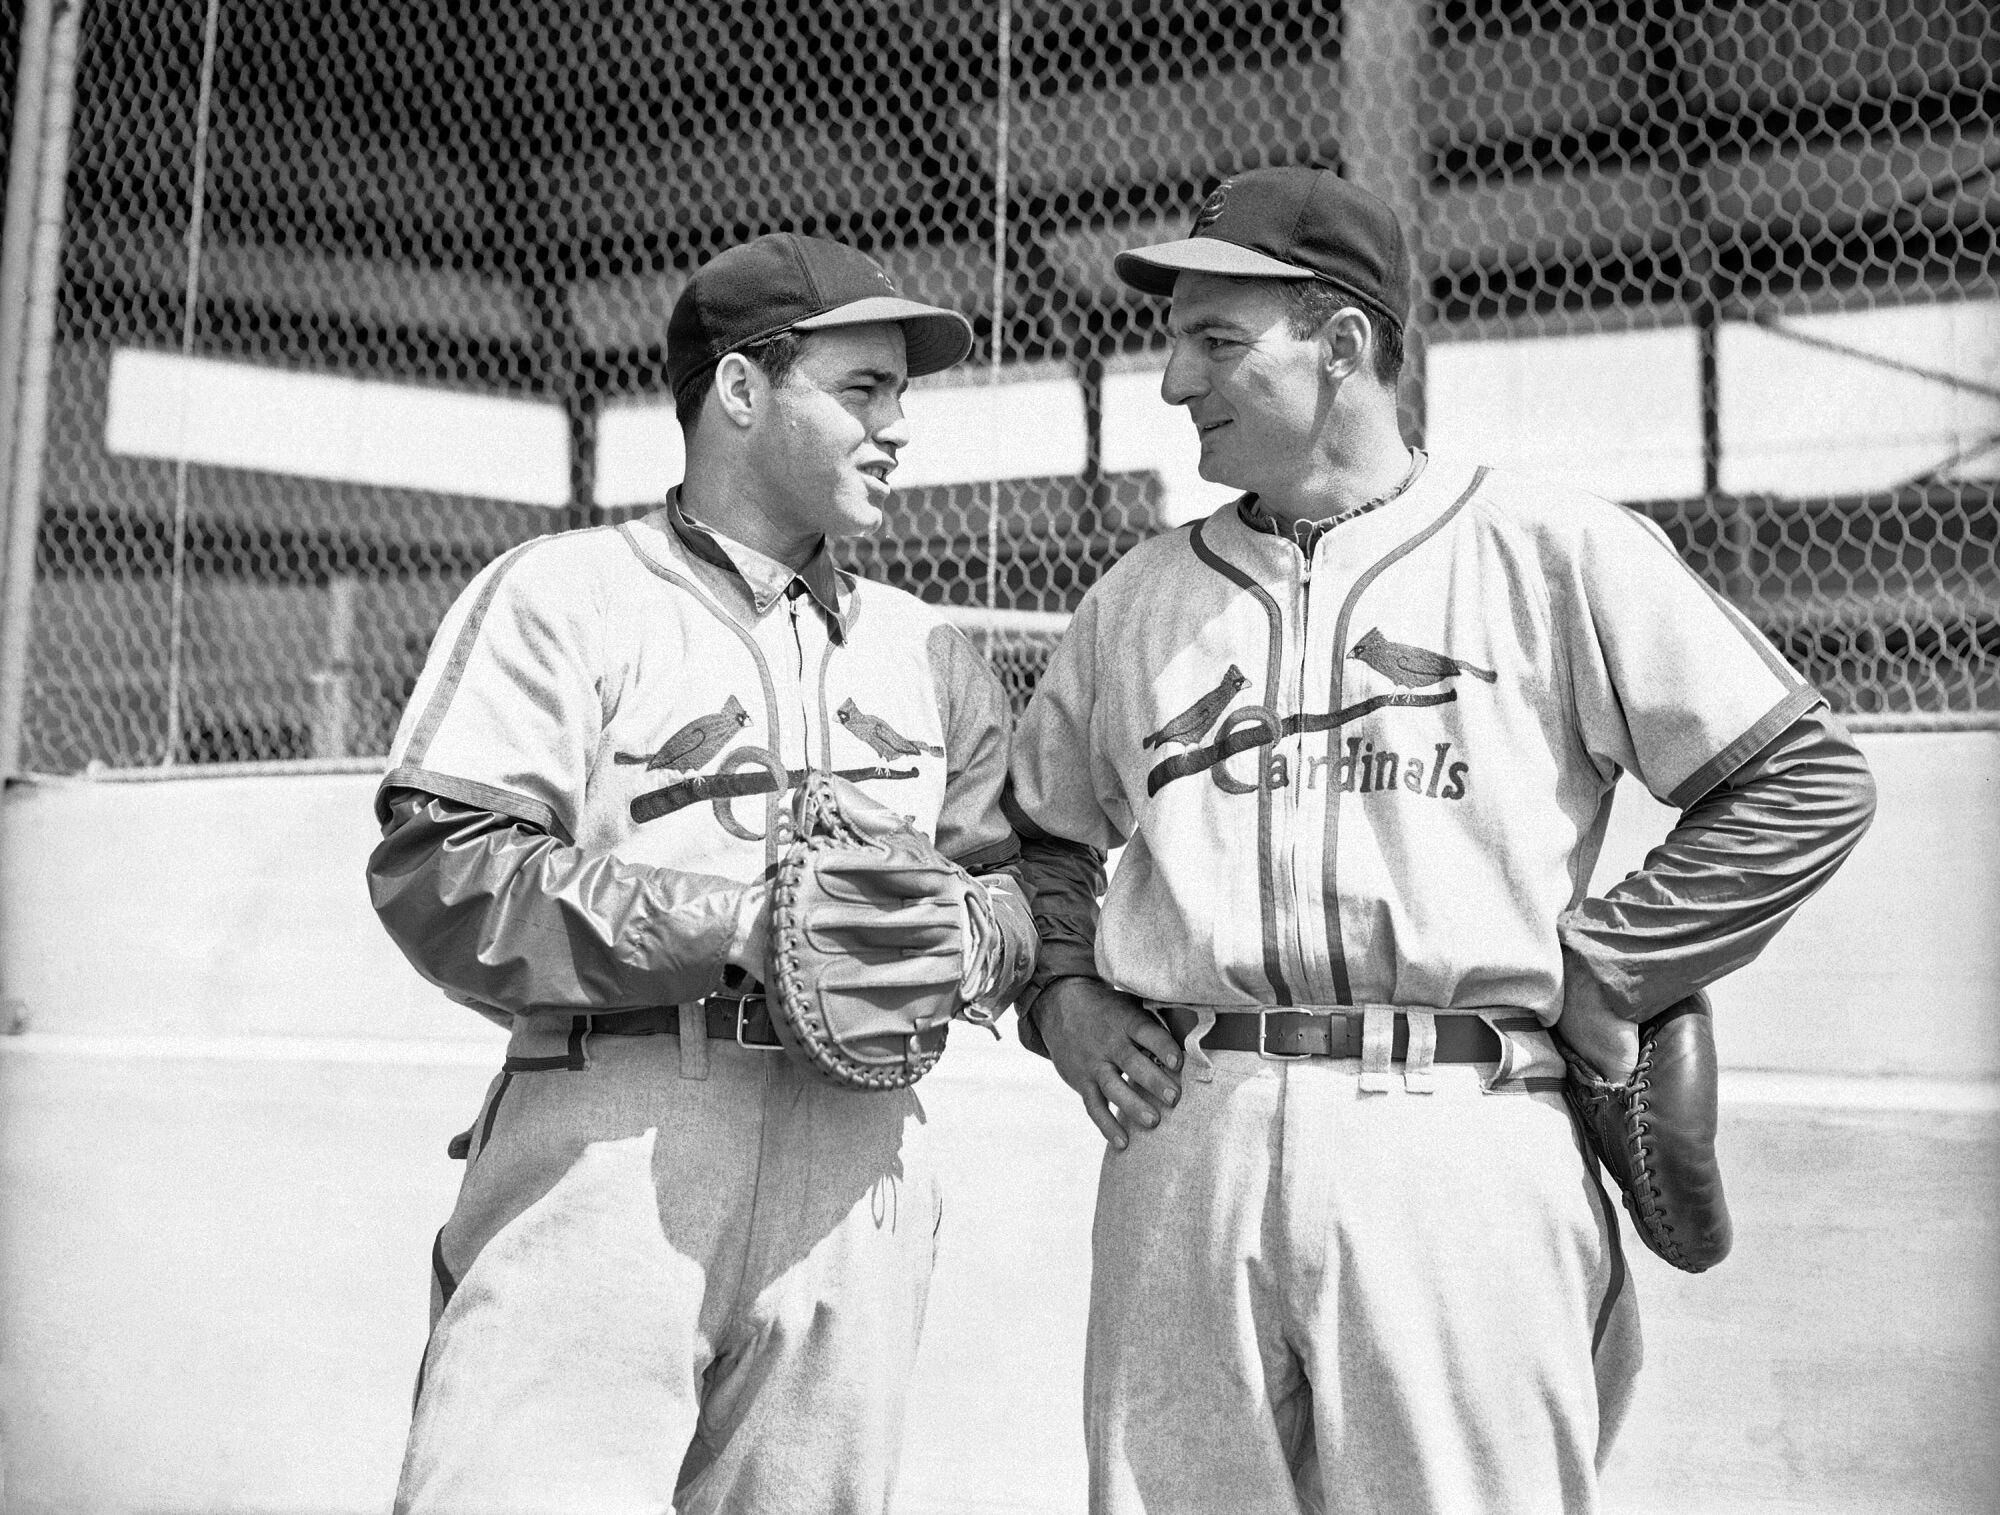 Catchers Joe Garagiola, left, and Del Wilber of the St. Louis Cardinals, chat during morning workout of the team in 1947.